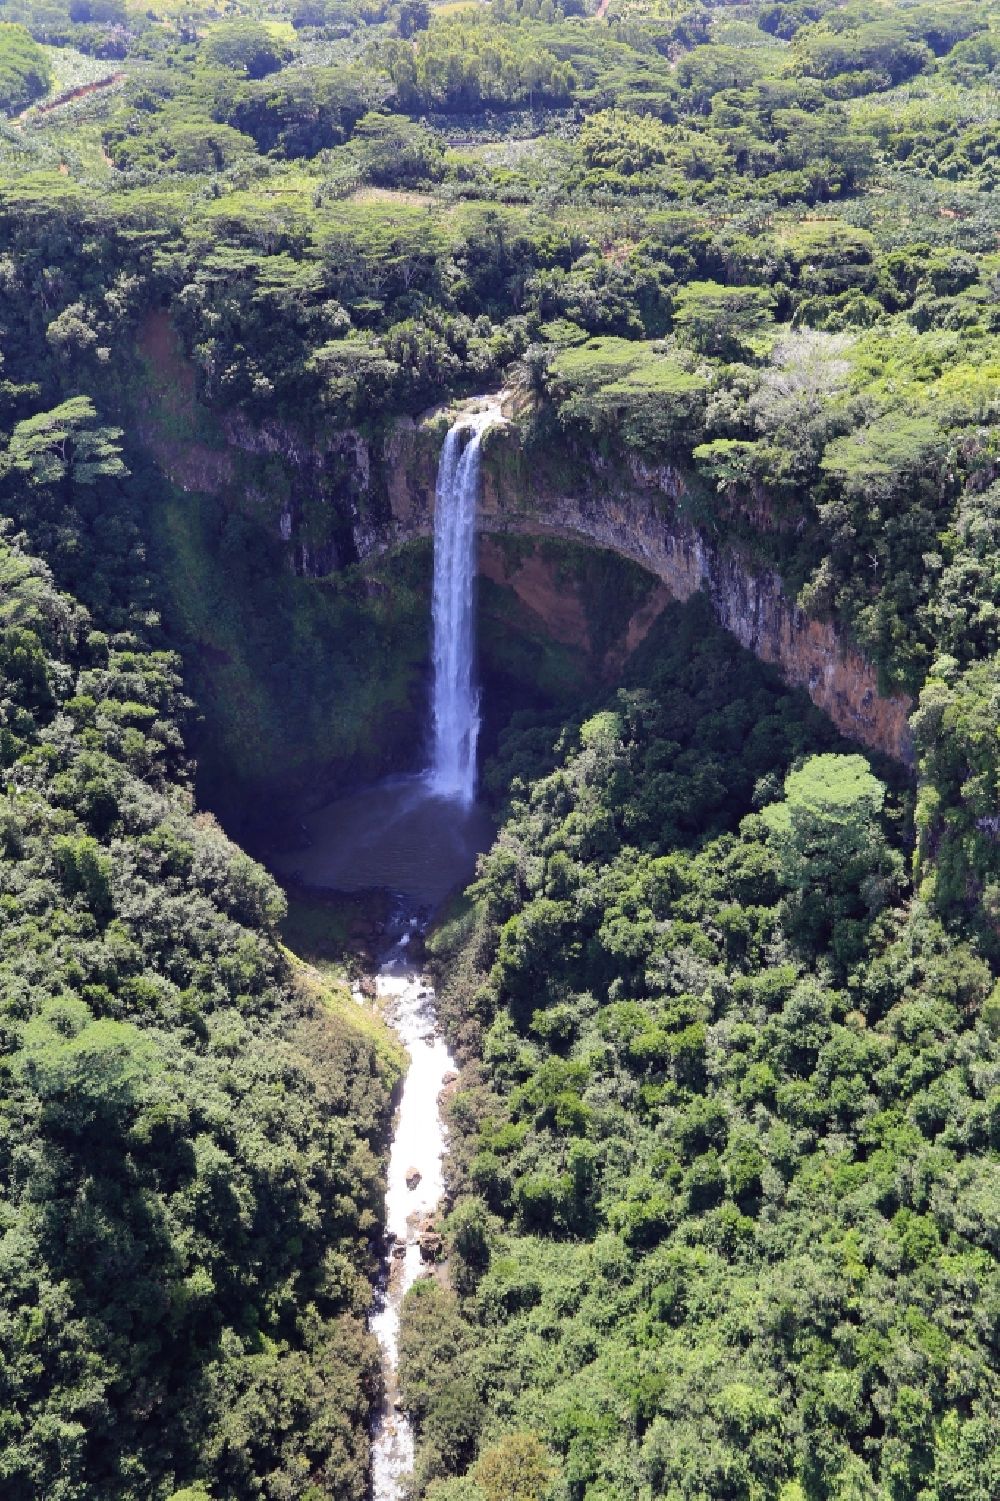 Aerial photograph Chamarel Waterfall - Tourist attraction, the falls at at Chamarel ( Cascade Chamarel ) on the island Mauritius in the Indian Ocean